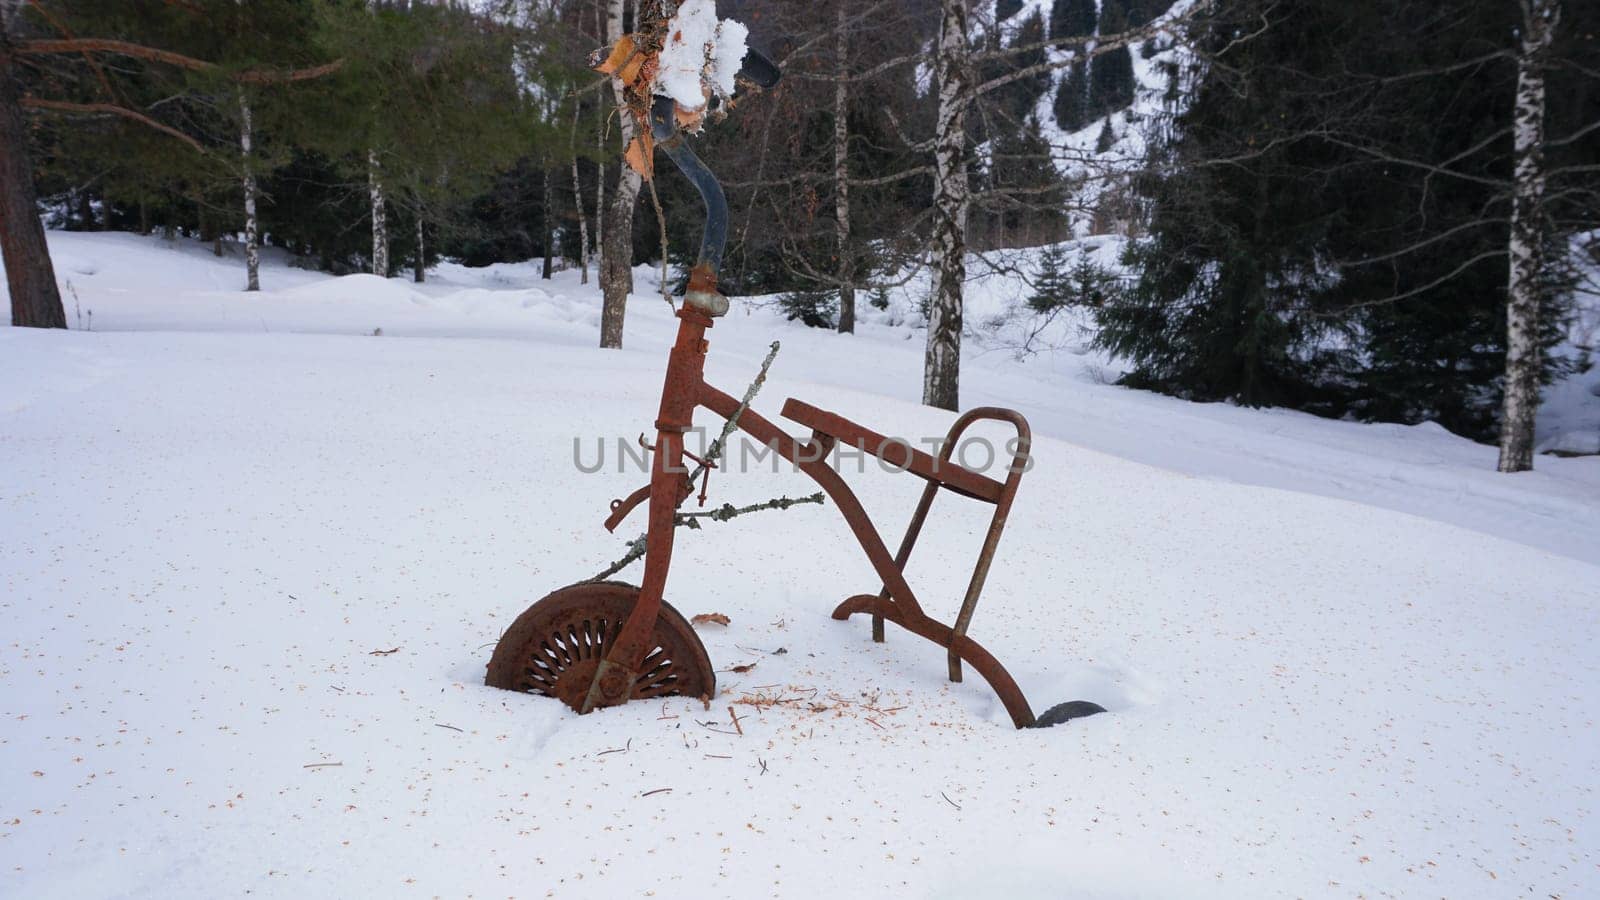 An old rusty tricycle in the winter forest by Passcal